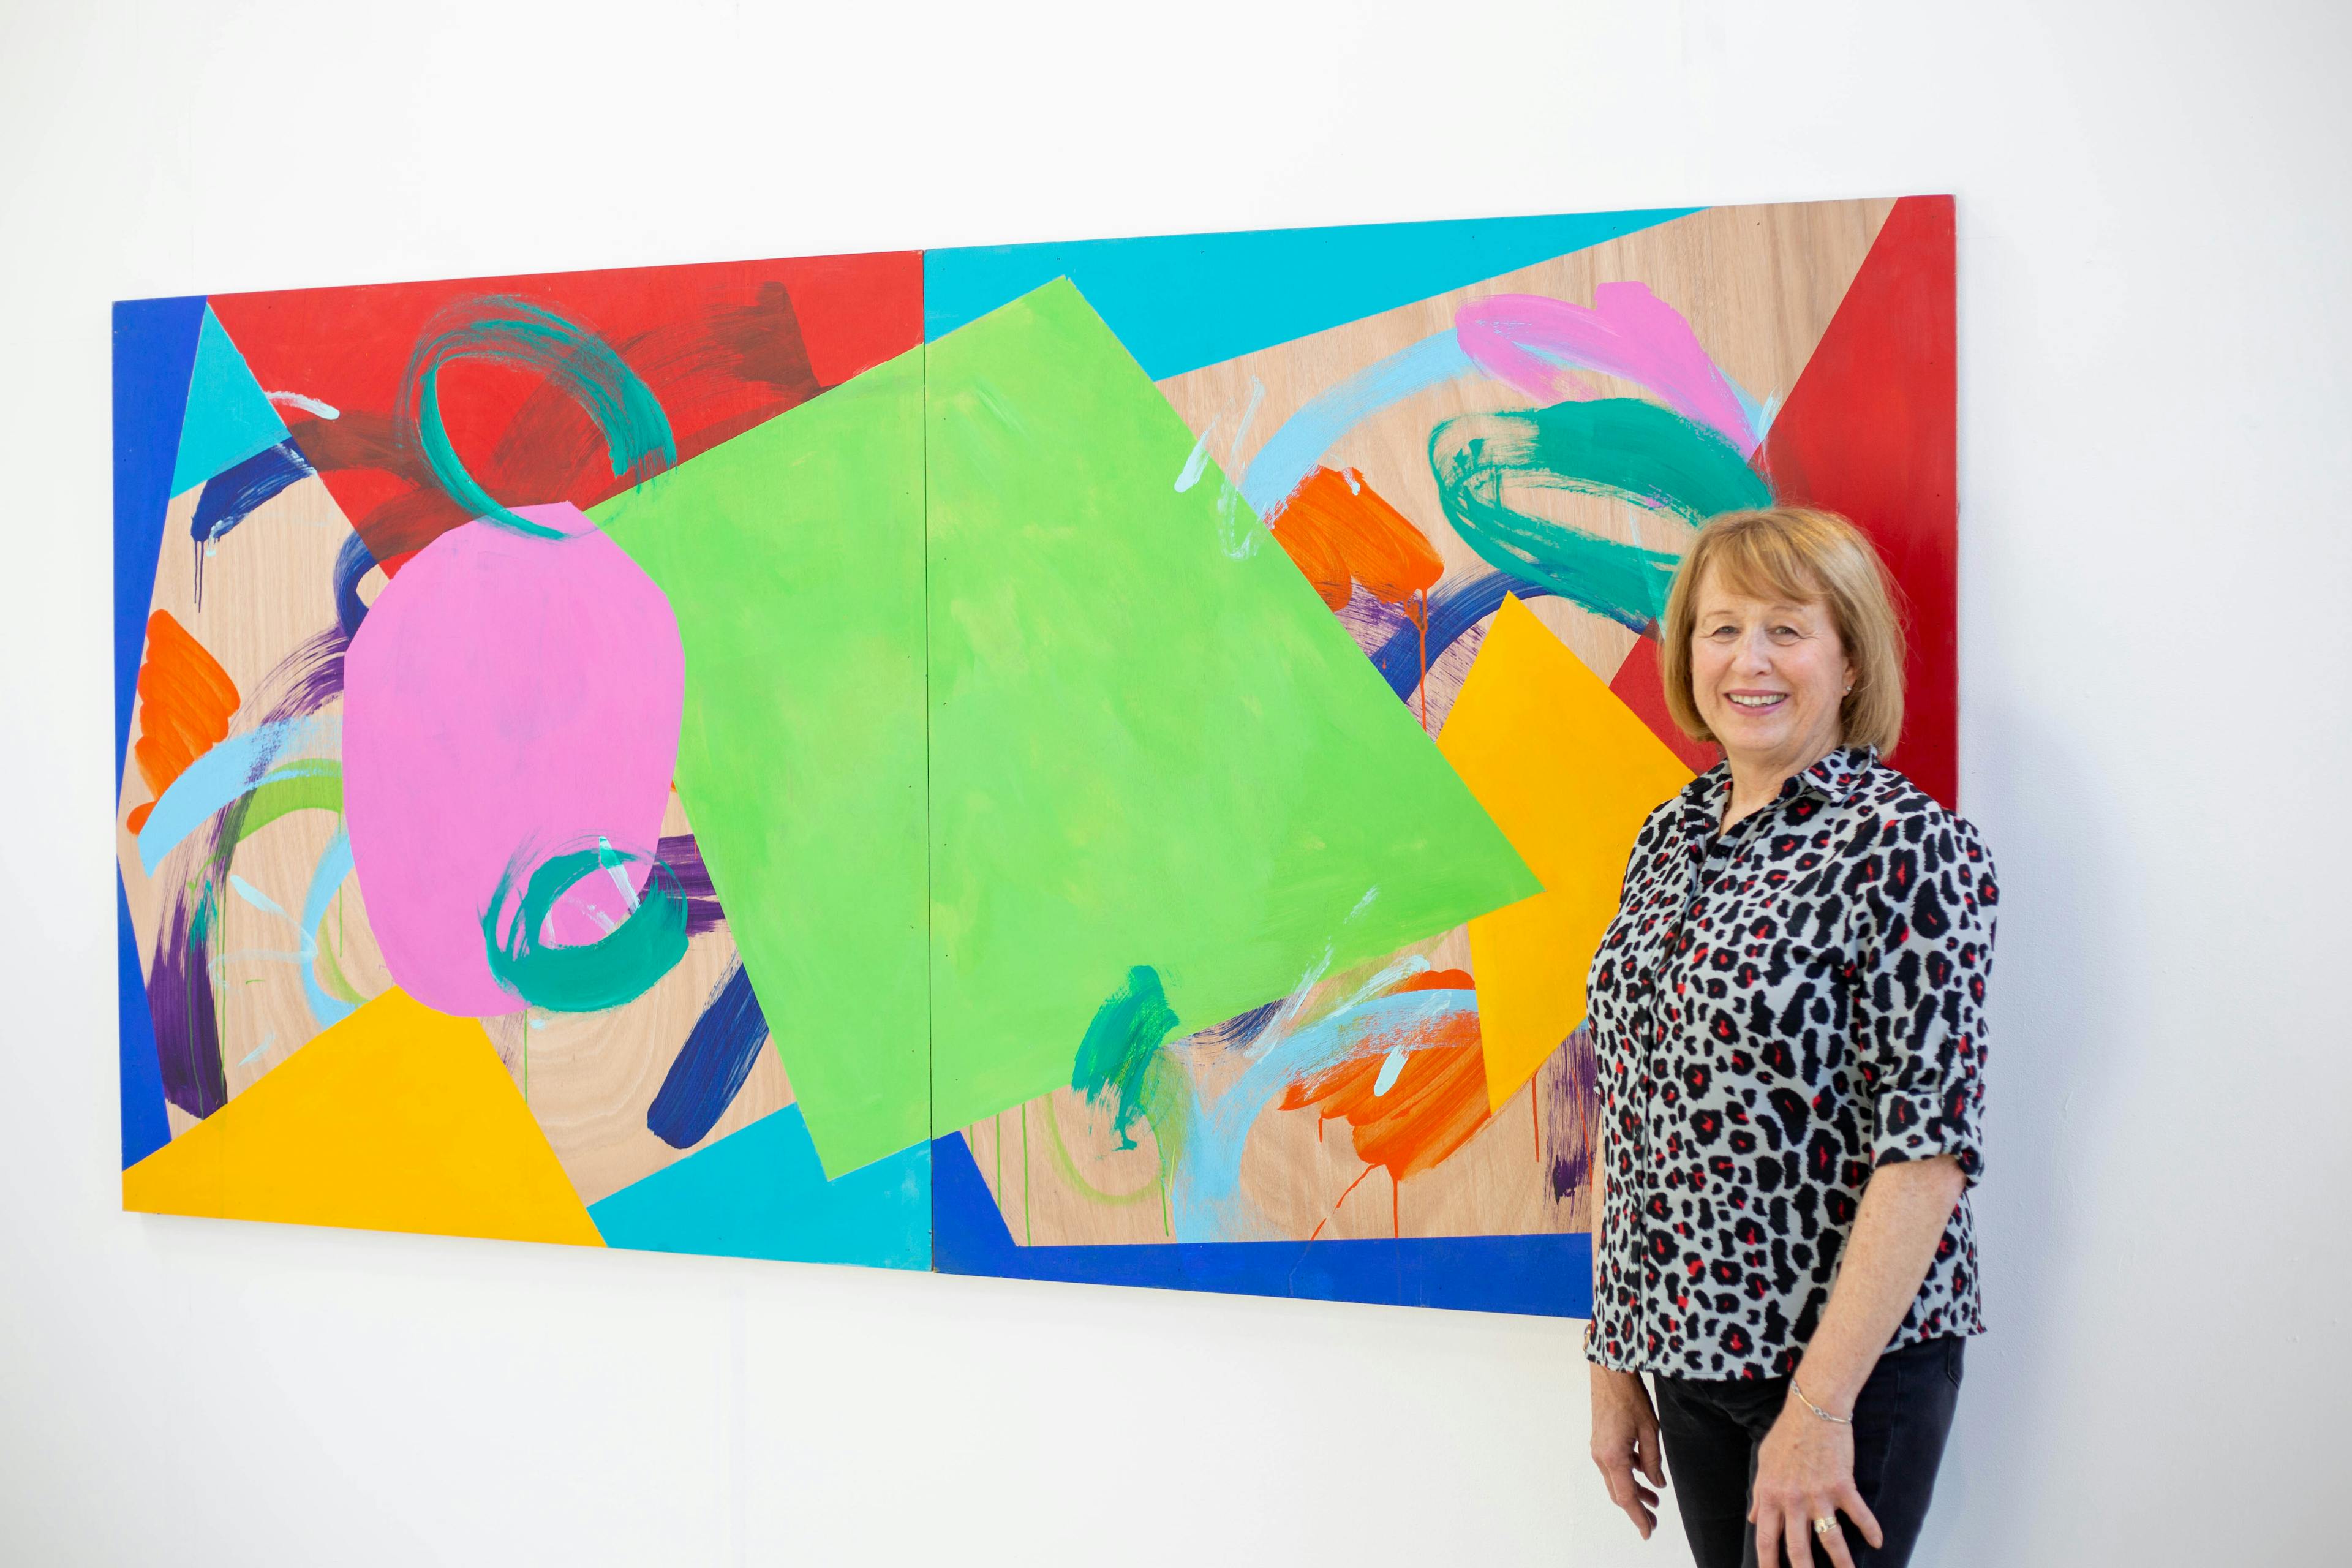 Sue with her work